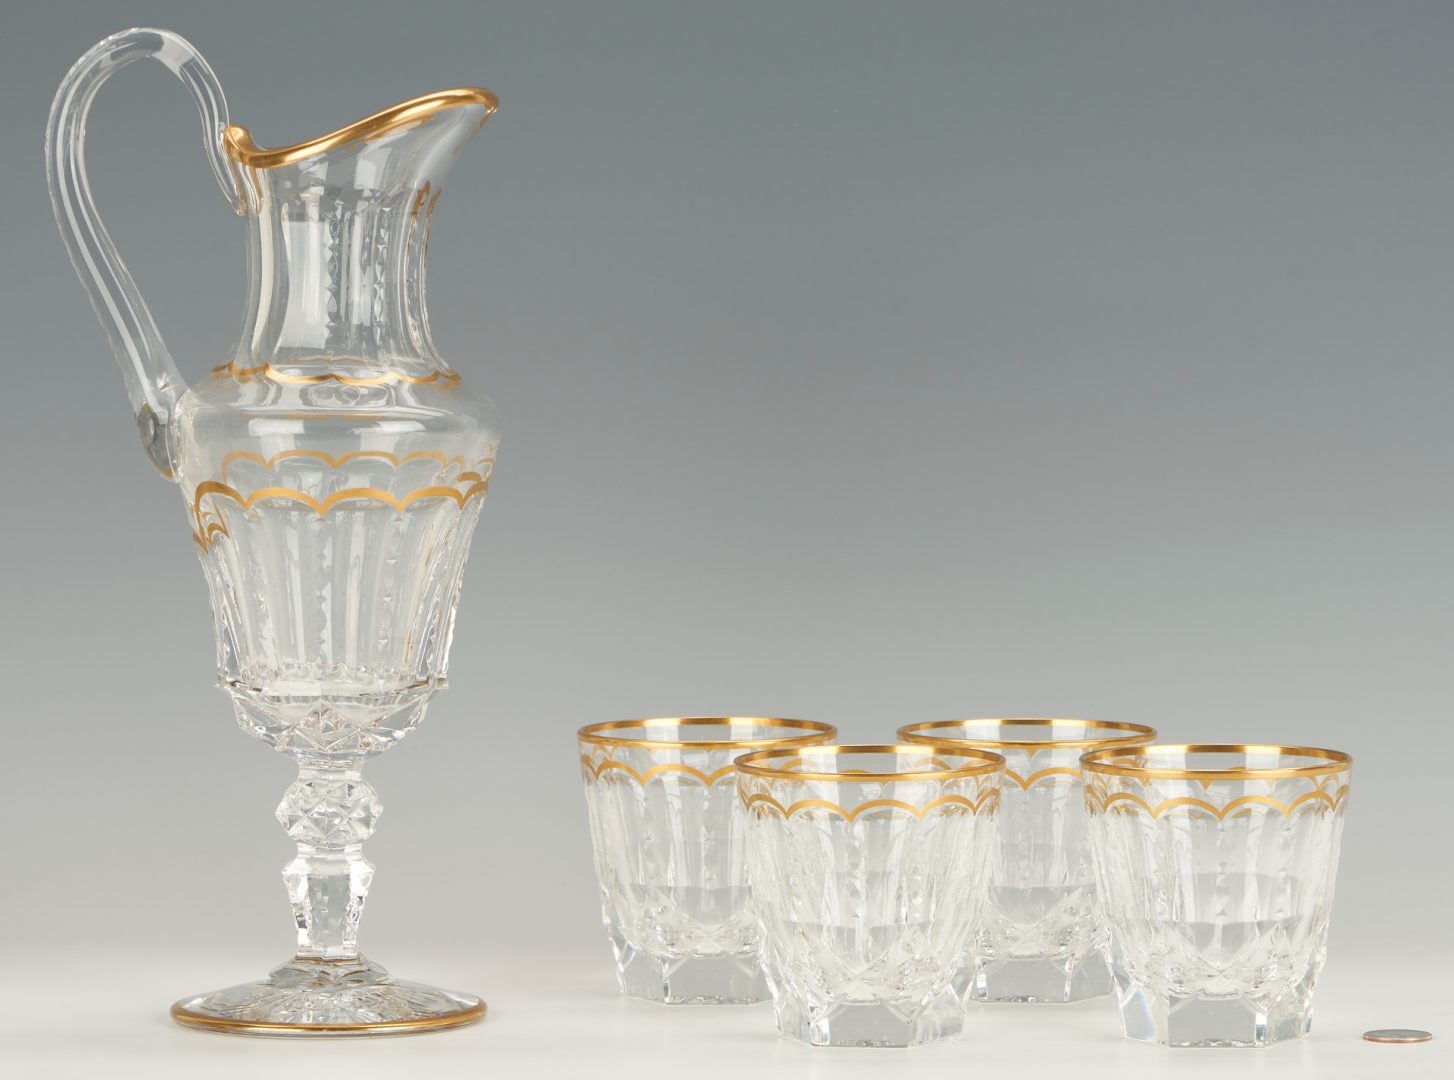 Lot 376: 5 pcs St. Louis Excellence Crystal, Pitcher & Old Fashioned Glasses